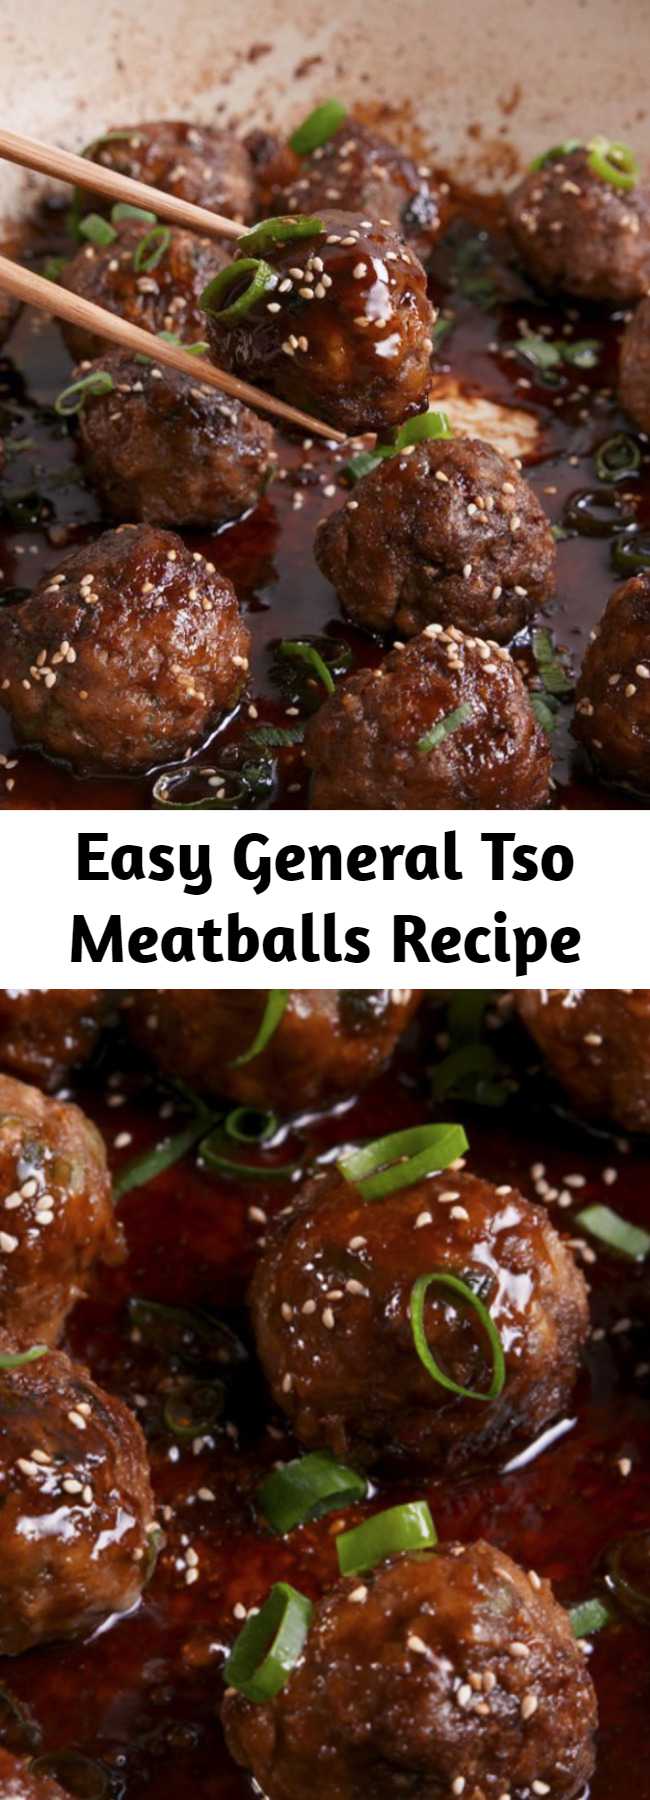 Easy General Tso Meatballs Recipe - Skip the takeout and create your own version as a meatball. #food #easyrecipe #dinner #familydinner #ideas